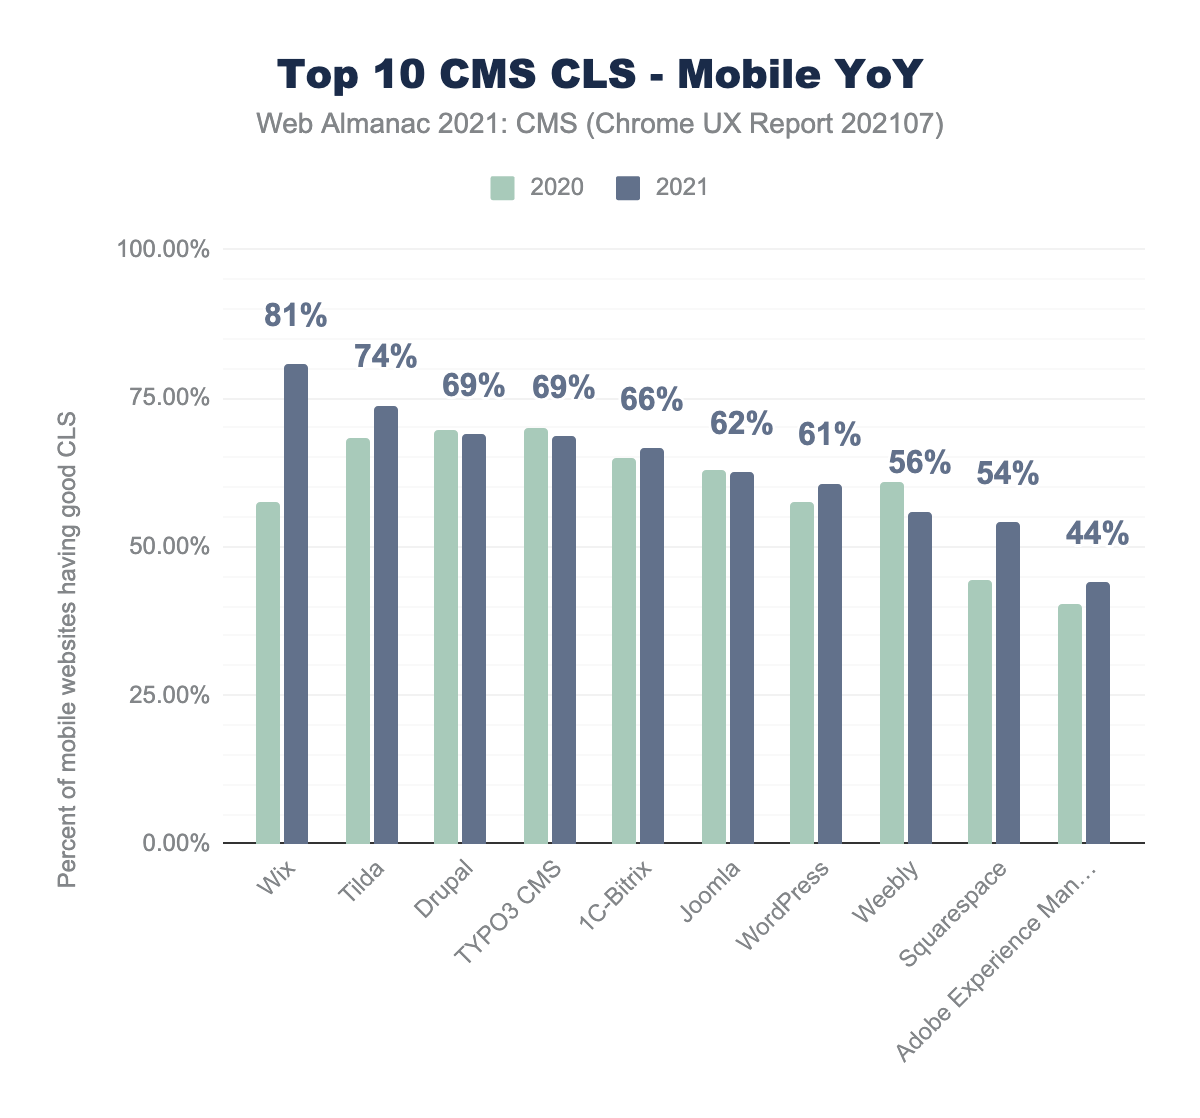 Top 10 CMSs CLS performance for mobile views year-over-year.